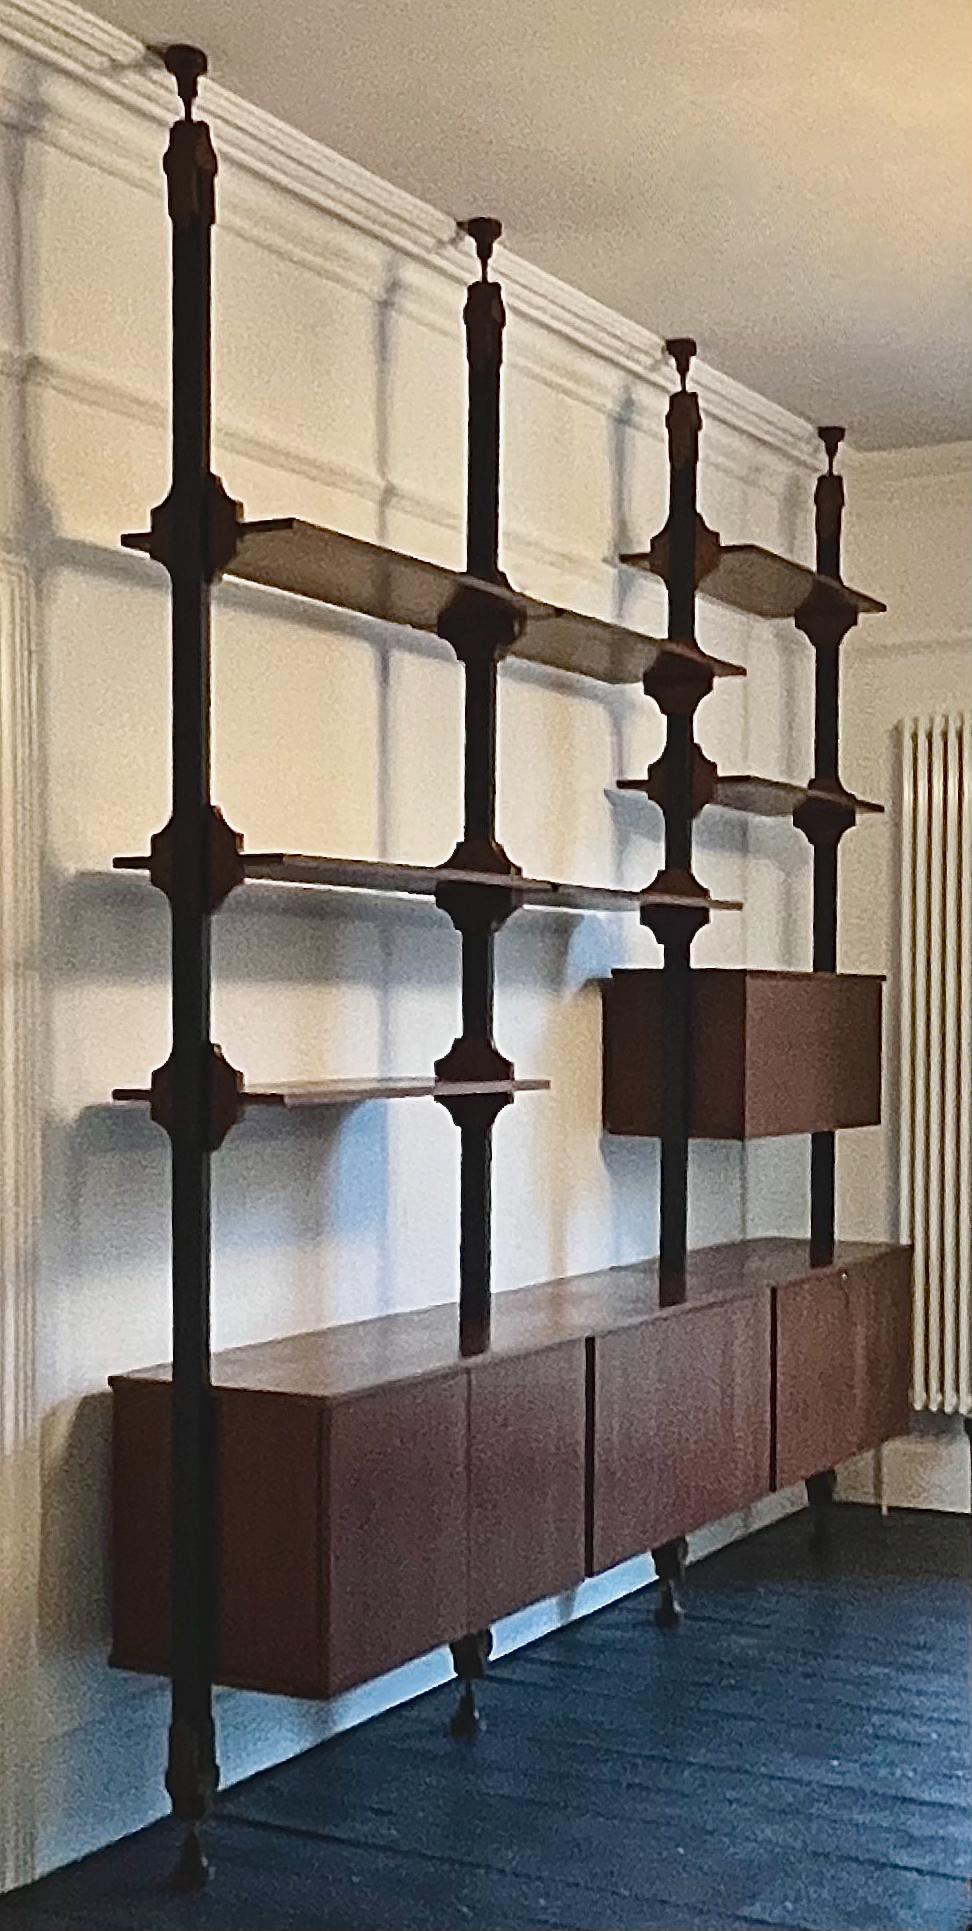 A floor-to-ceiling shelving unit, with space for both display and storage. Italy, second half 20th century. Designer unknown.

The shelving unit is made up of separate components - uprights, cupboards and shelves - which could be used as a single